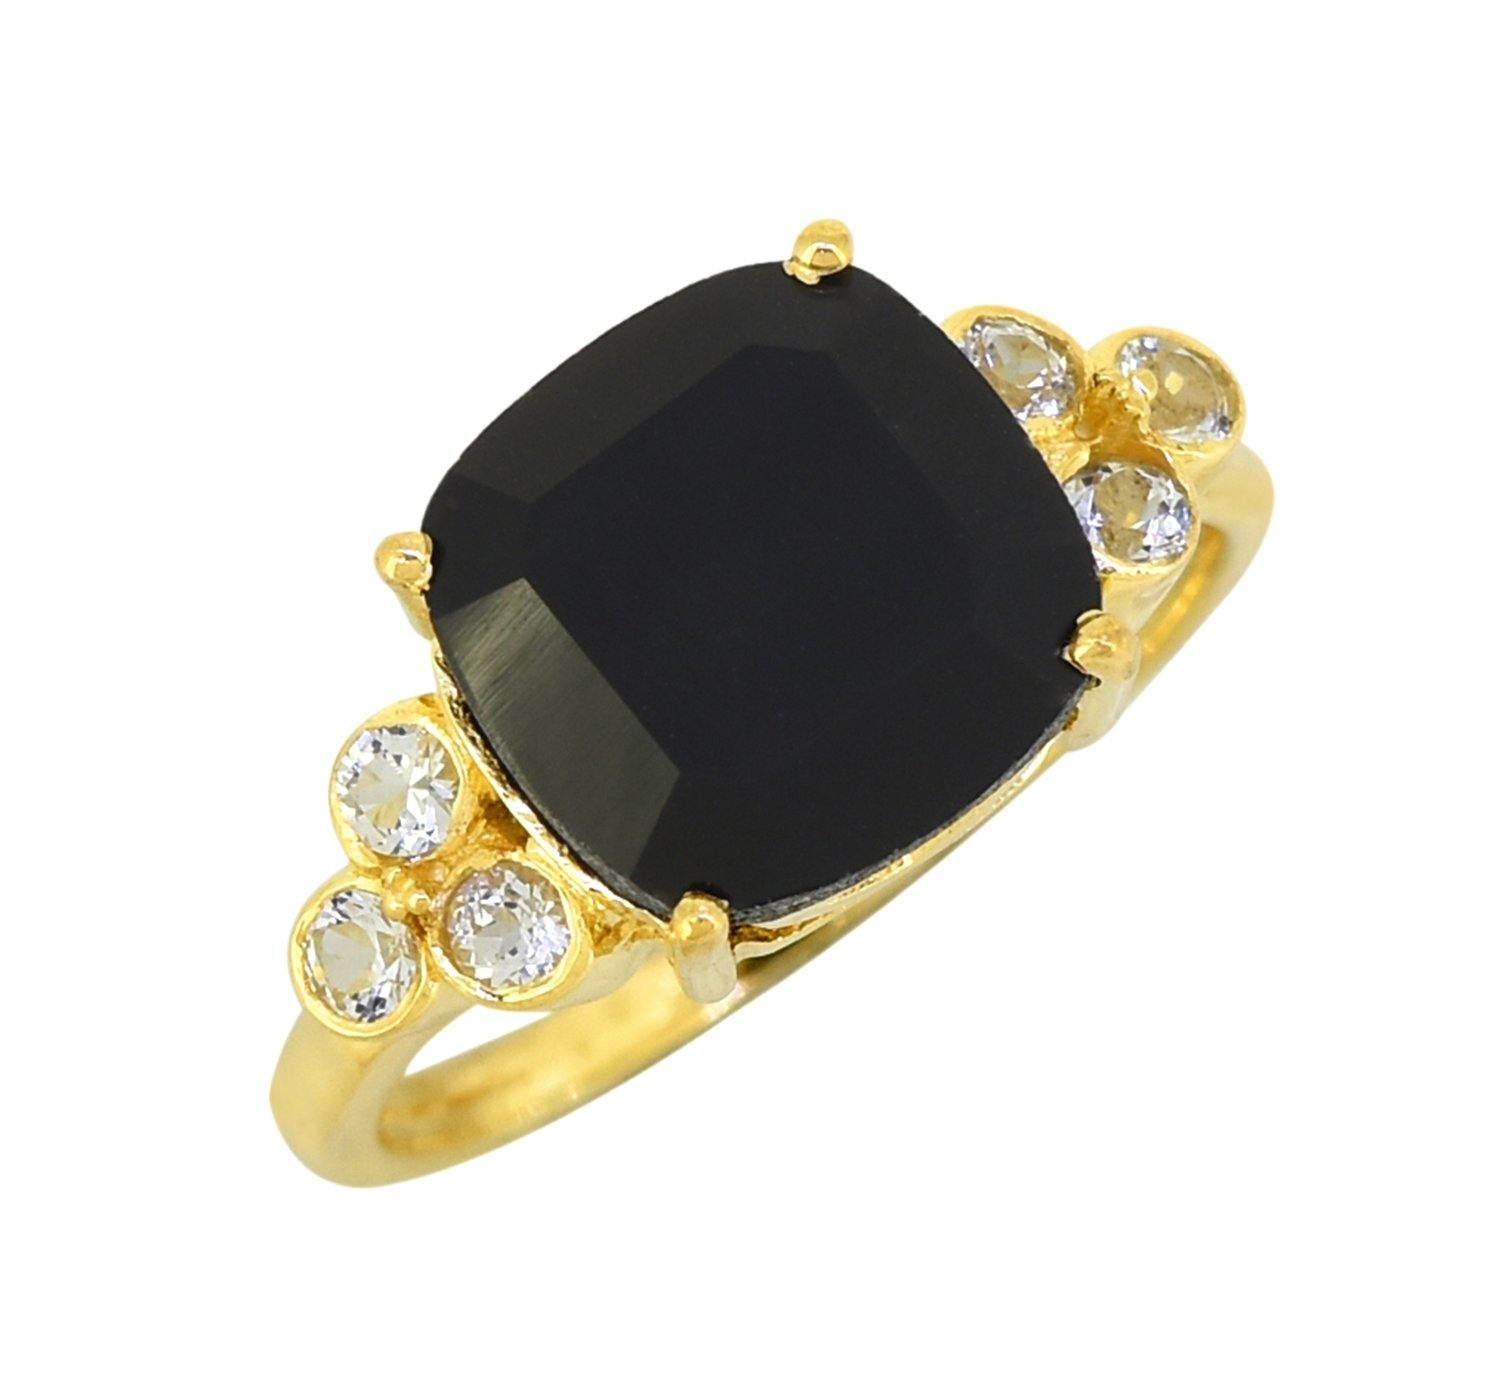 Black Onyx Solid 925 Sterling Silver Gold Plated Ring Genuine Gemstone Jewelry - YoTreasure